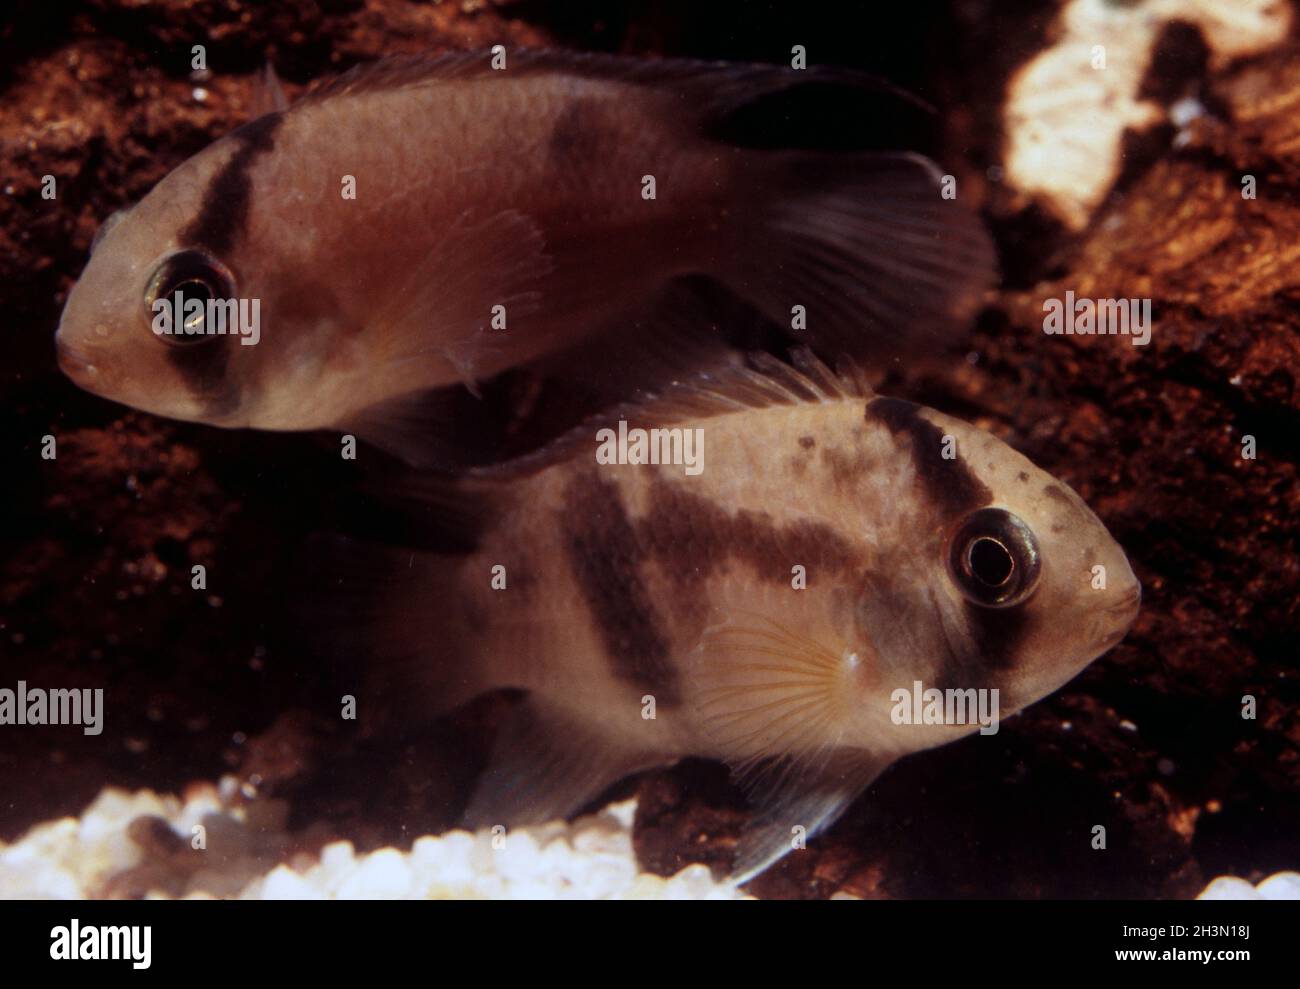 Pair of Keyhole cichlid, Cleithracara maronii Stock Photo